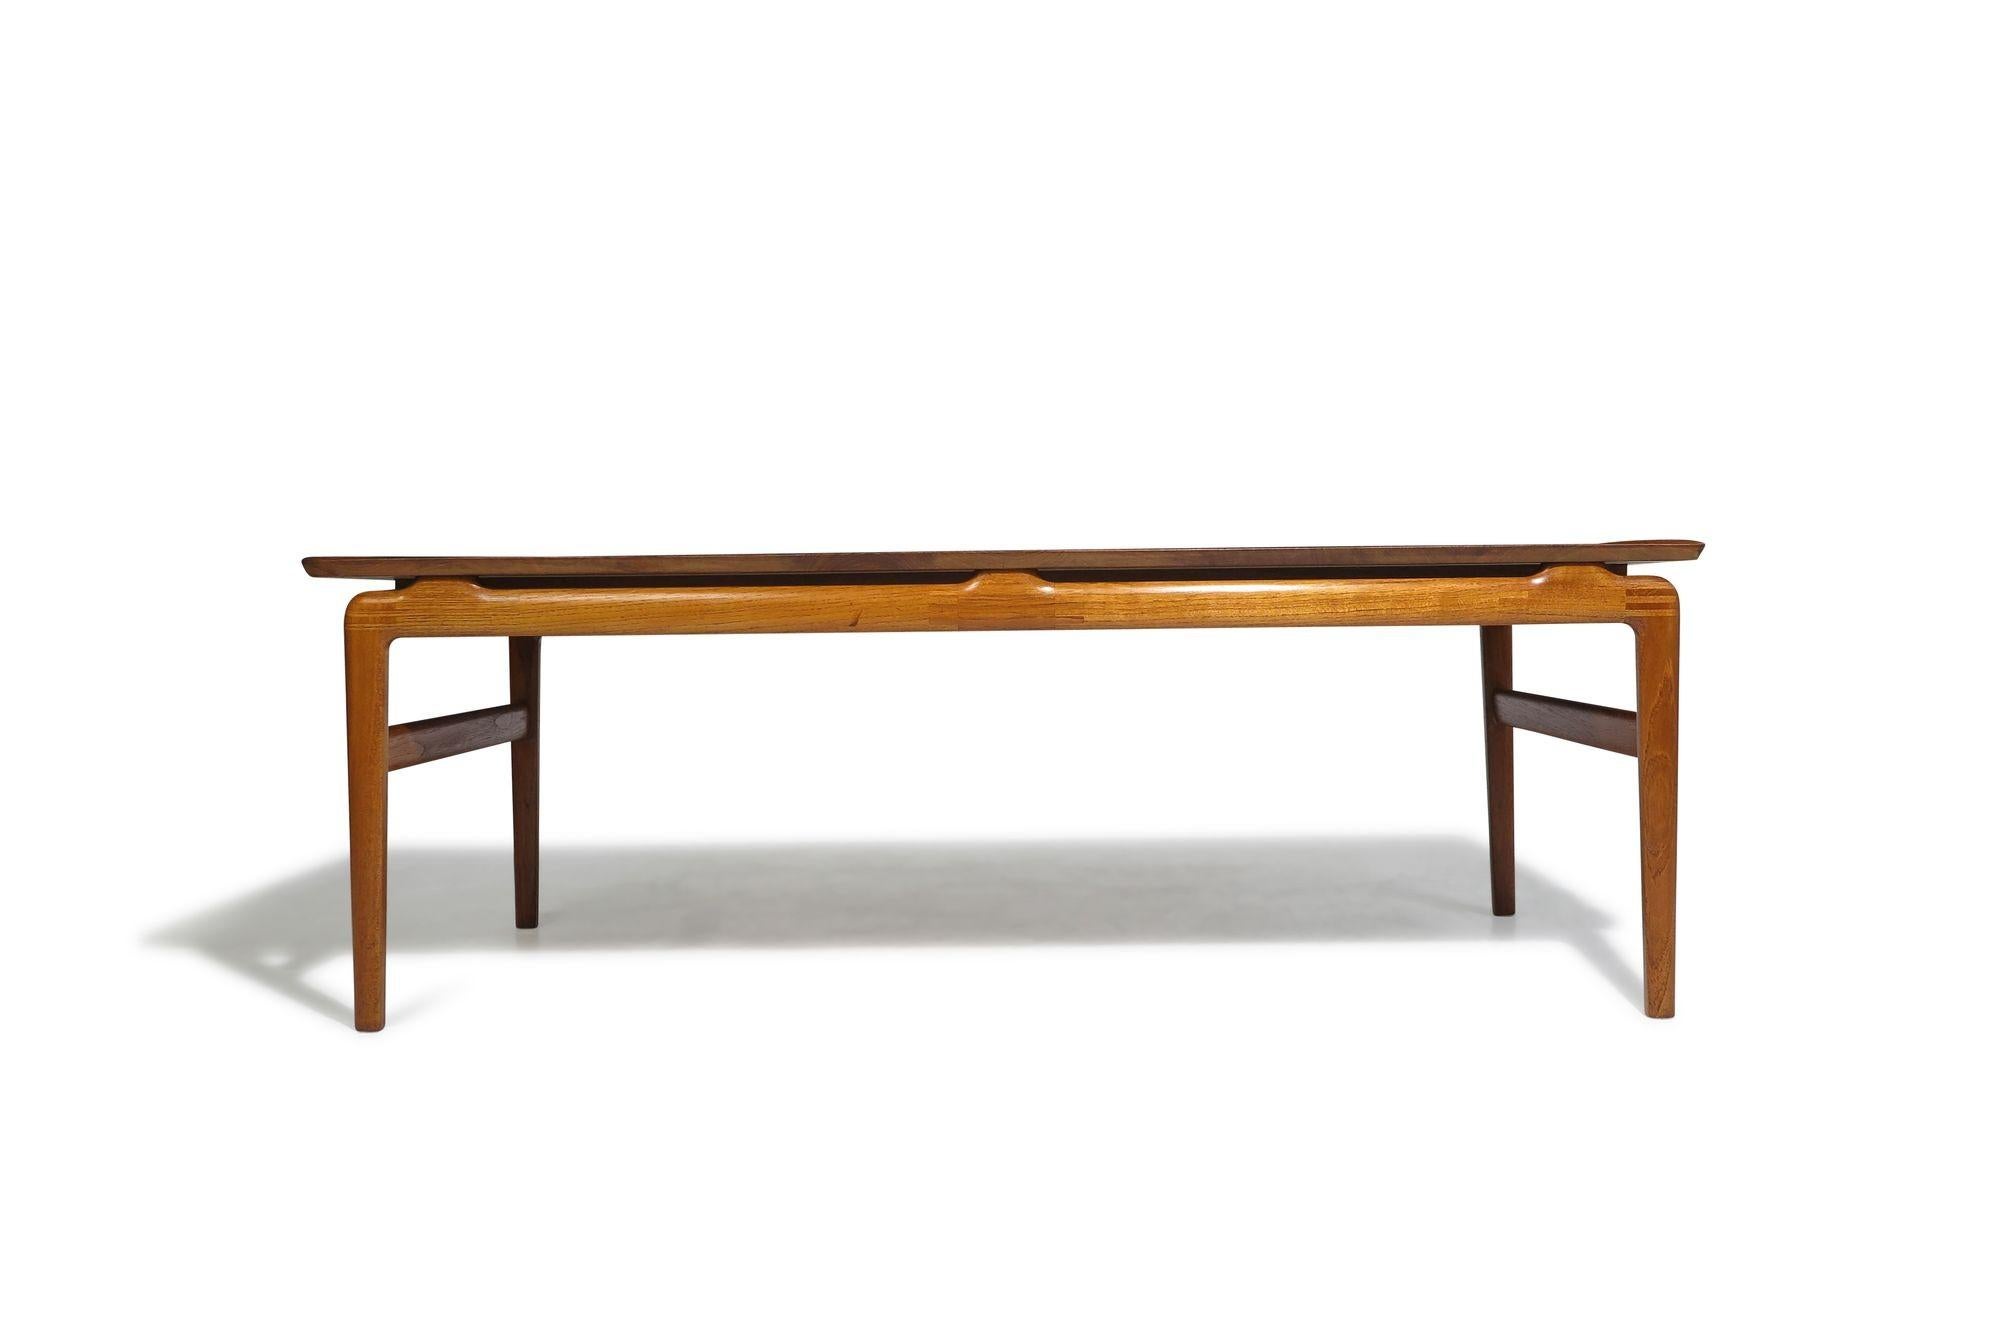 Solid teak coffee table designed by Peter Hvidt & Orla Molgaard Nielsen For France & Son, model 640, 1958 Denmark. Crafted of planks of old growth teak with exposed joinery on legs and apron. Professionally restored in a natural oil